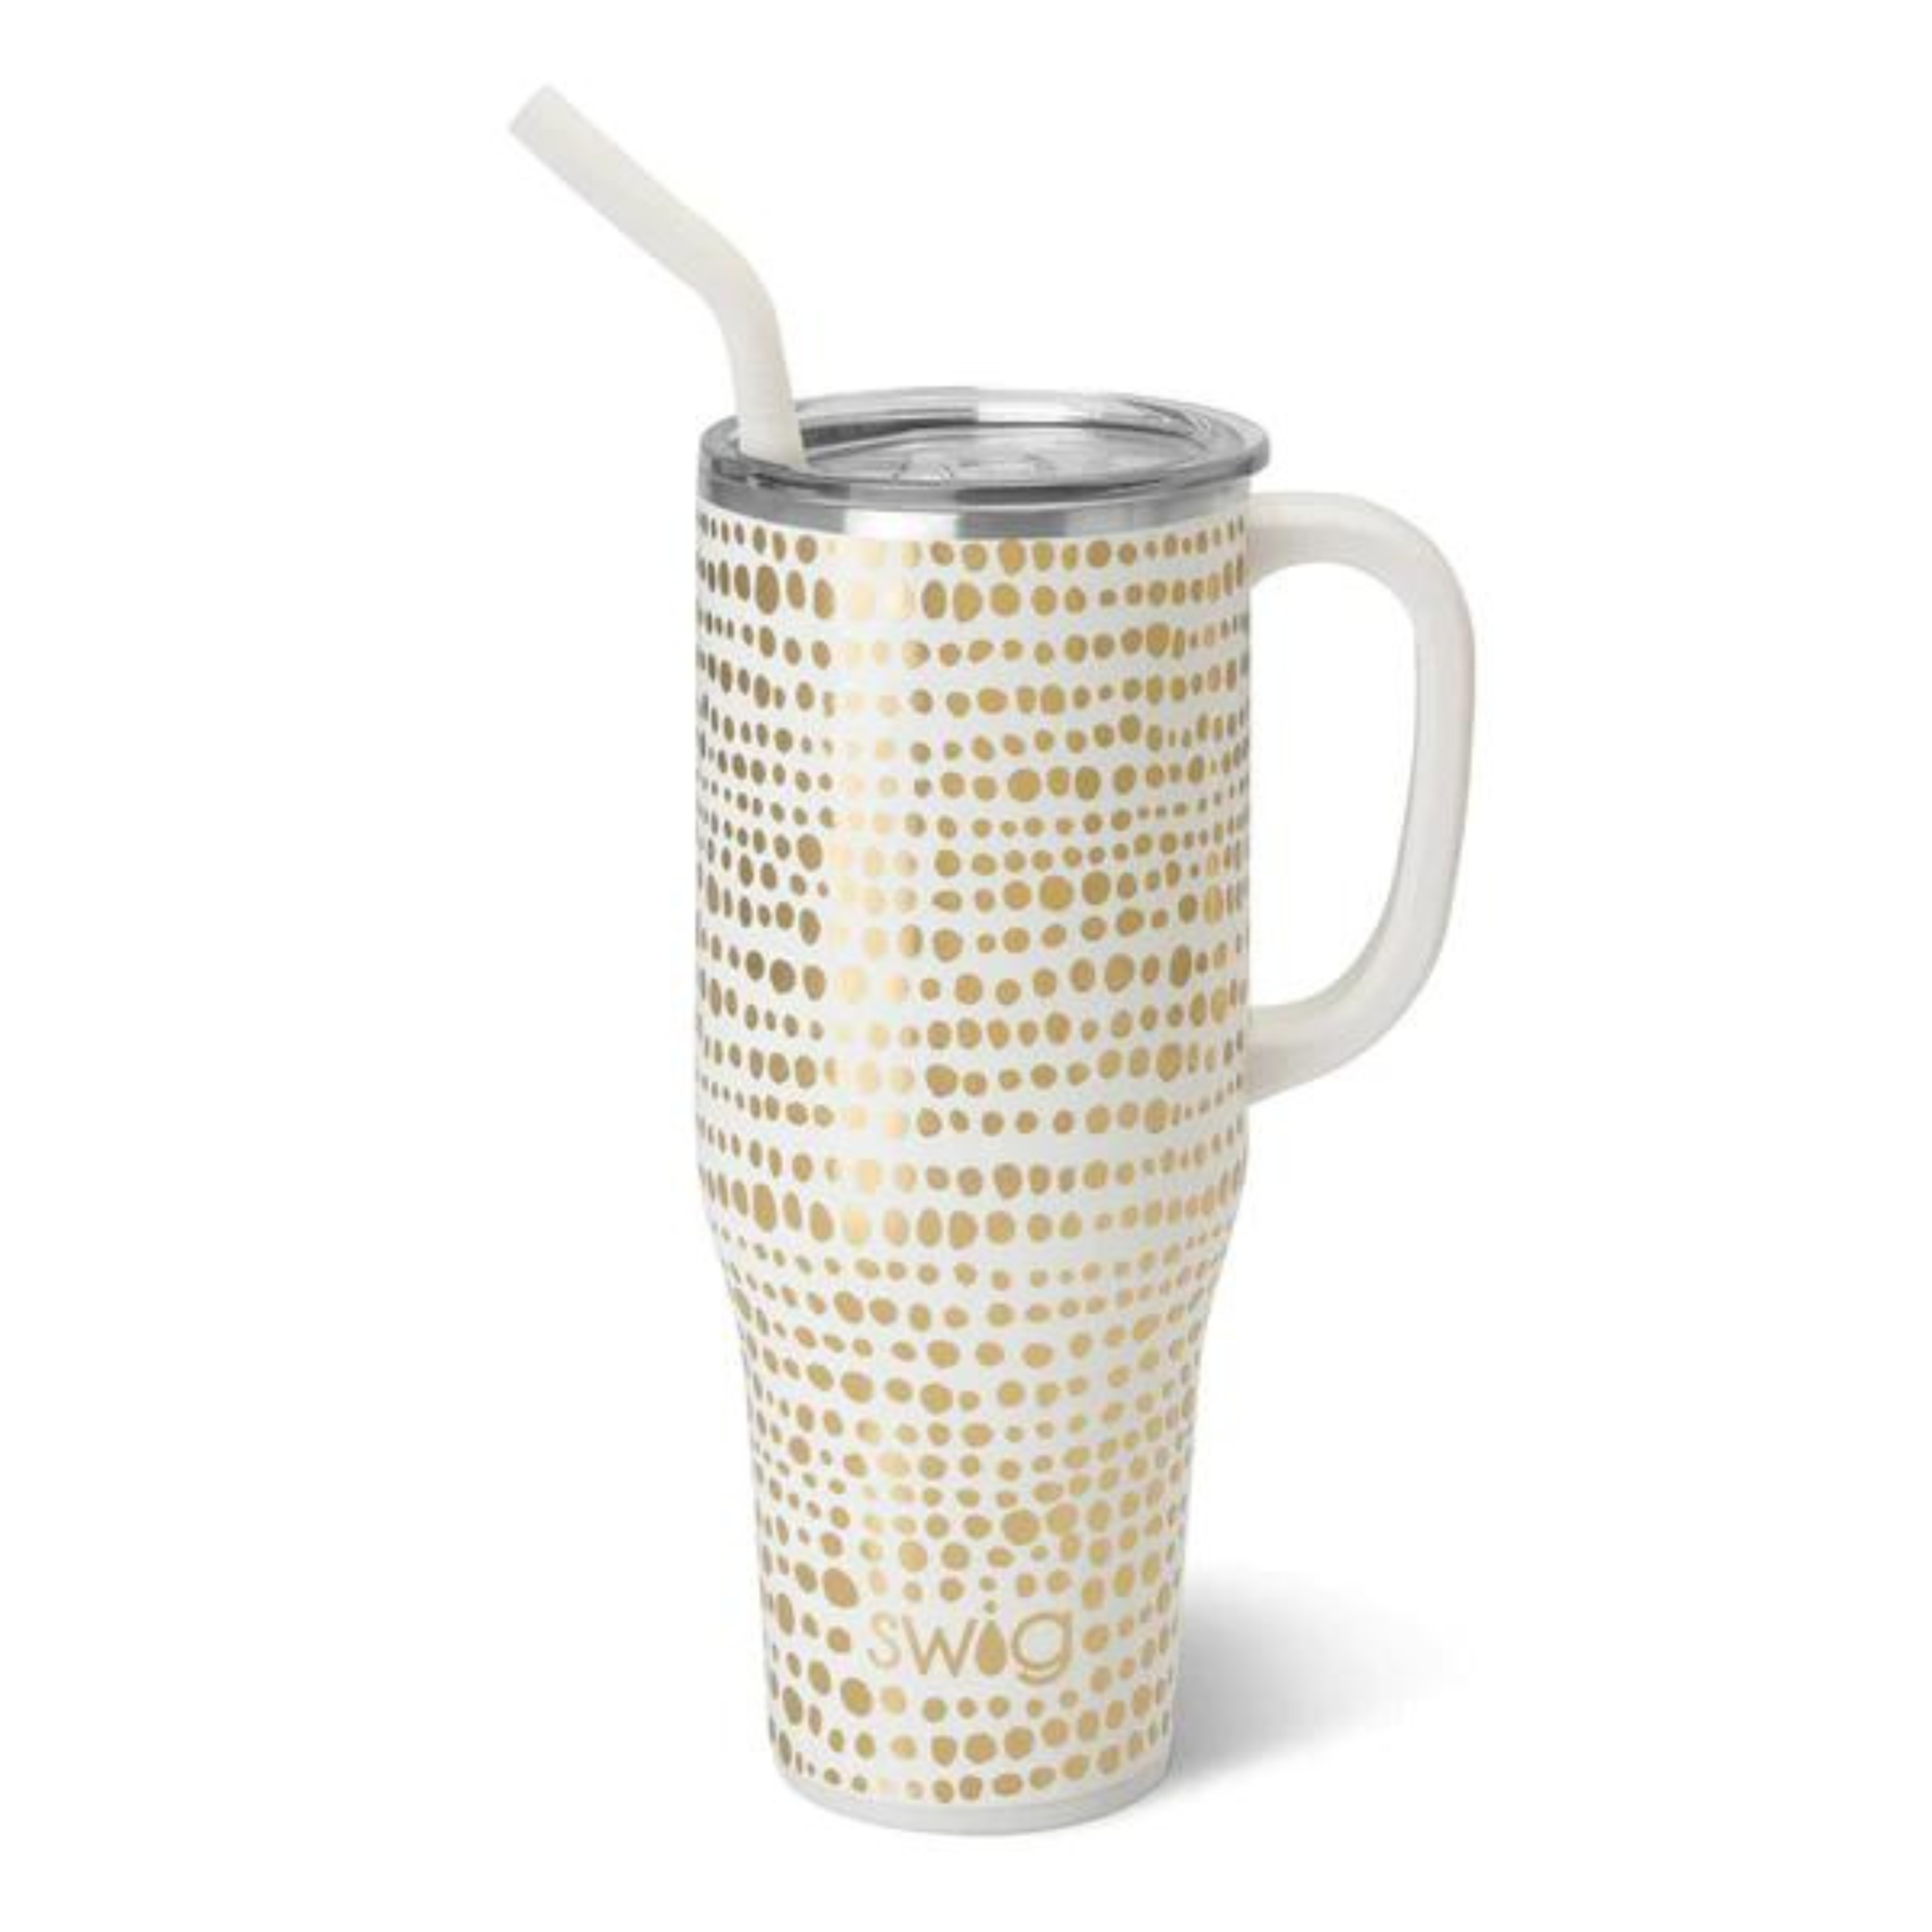 Swig glamazon gold 40 oz mega mug. This cup is white with gold design on top. The cup has a handle and s straw in white. The background of the picture is white.